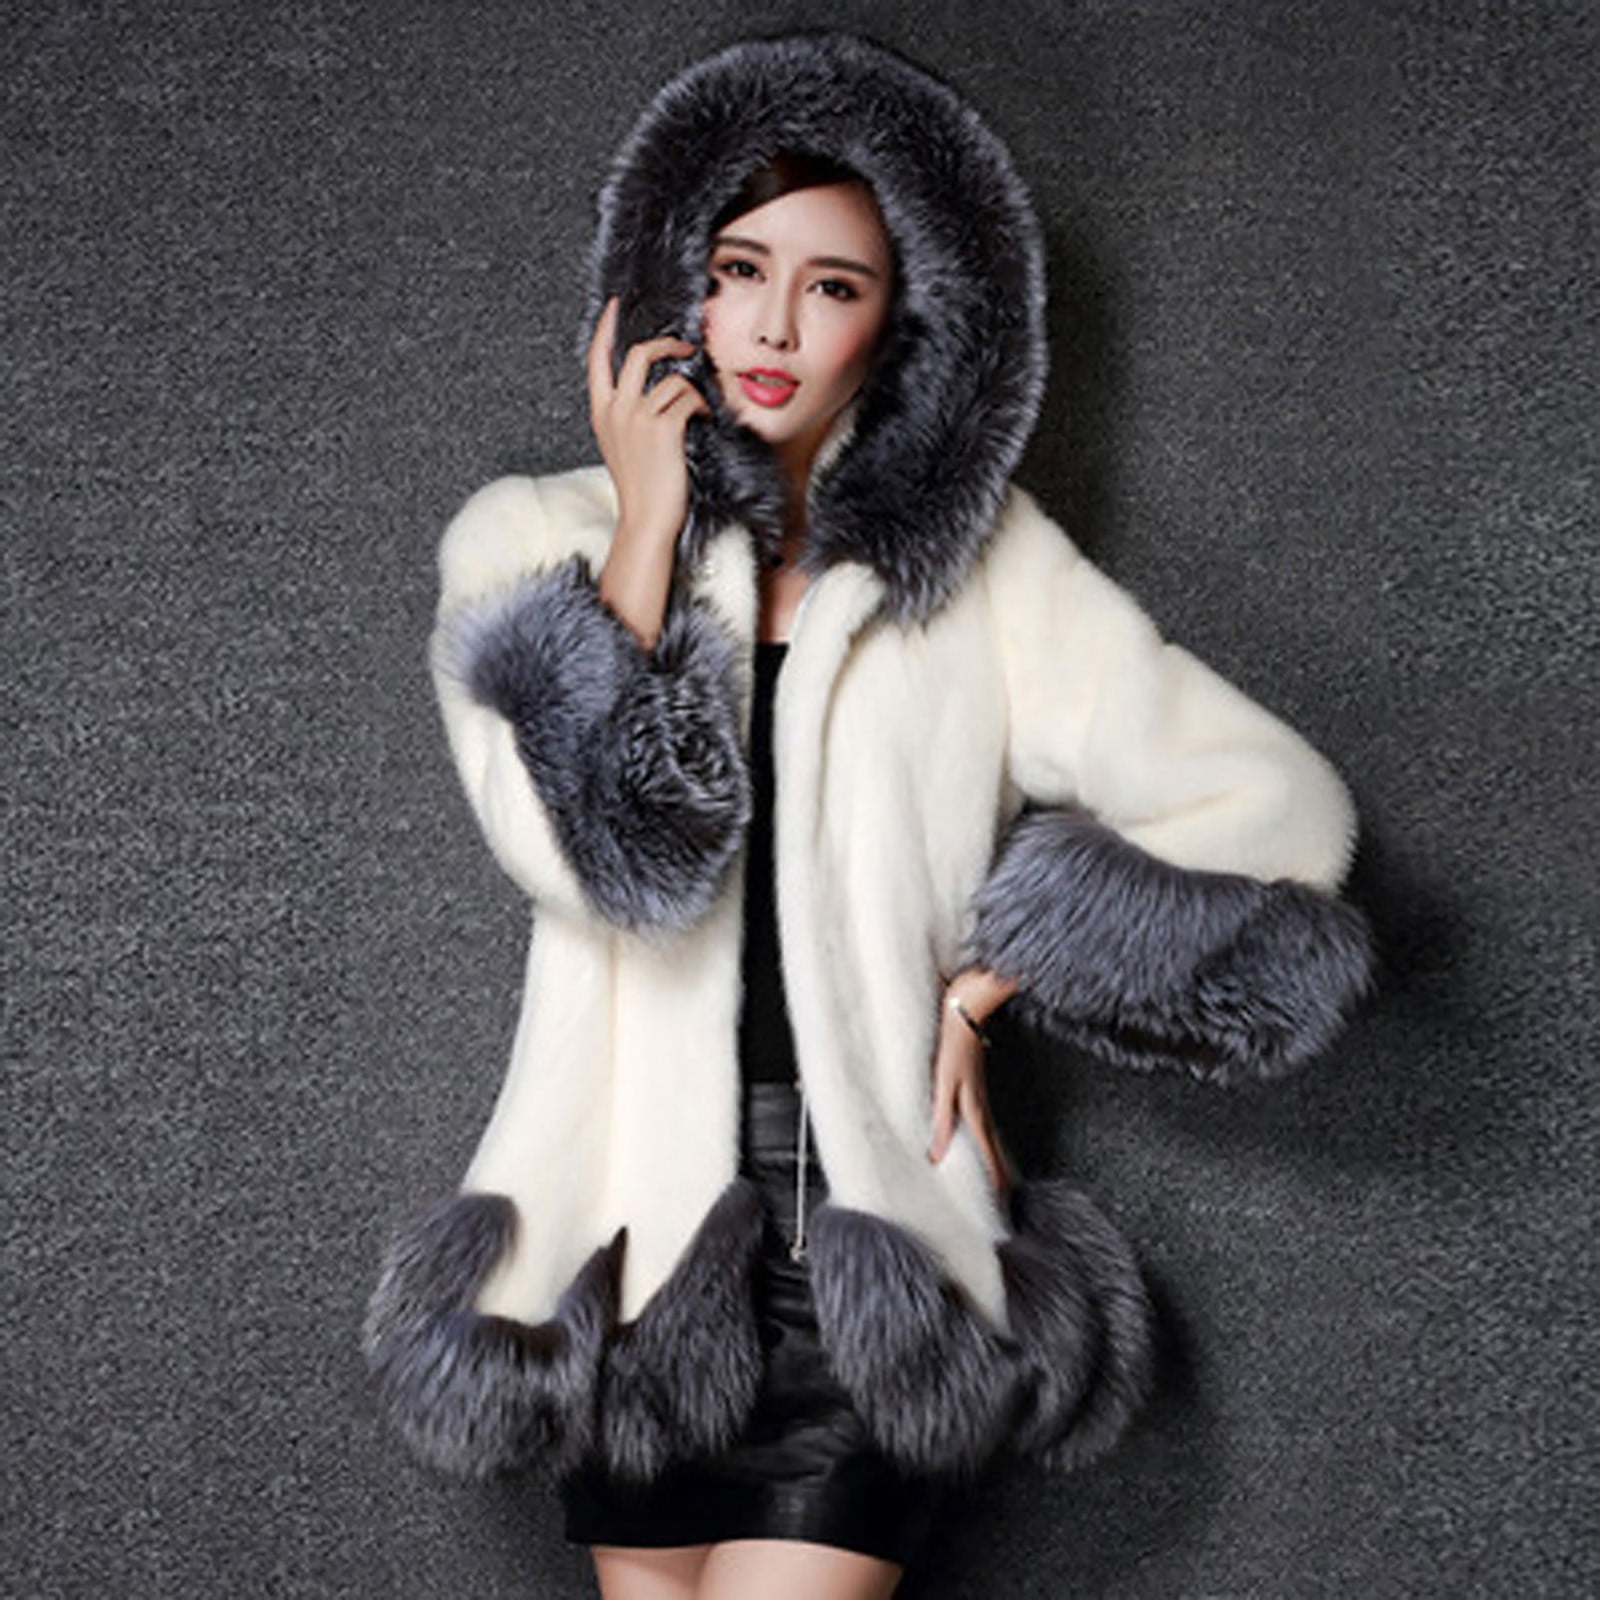 50% off Clear! purcolt Womens Plus Size Furry Cardigan Coat Solid Color  Winter Warm Plush Open Front Jacket Wool Shawl Cloak Cape Hooded Outerwear  on